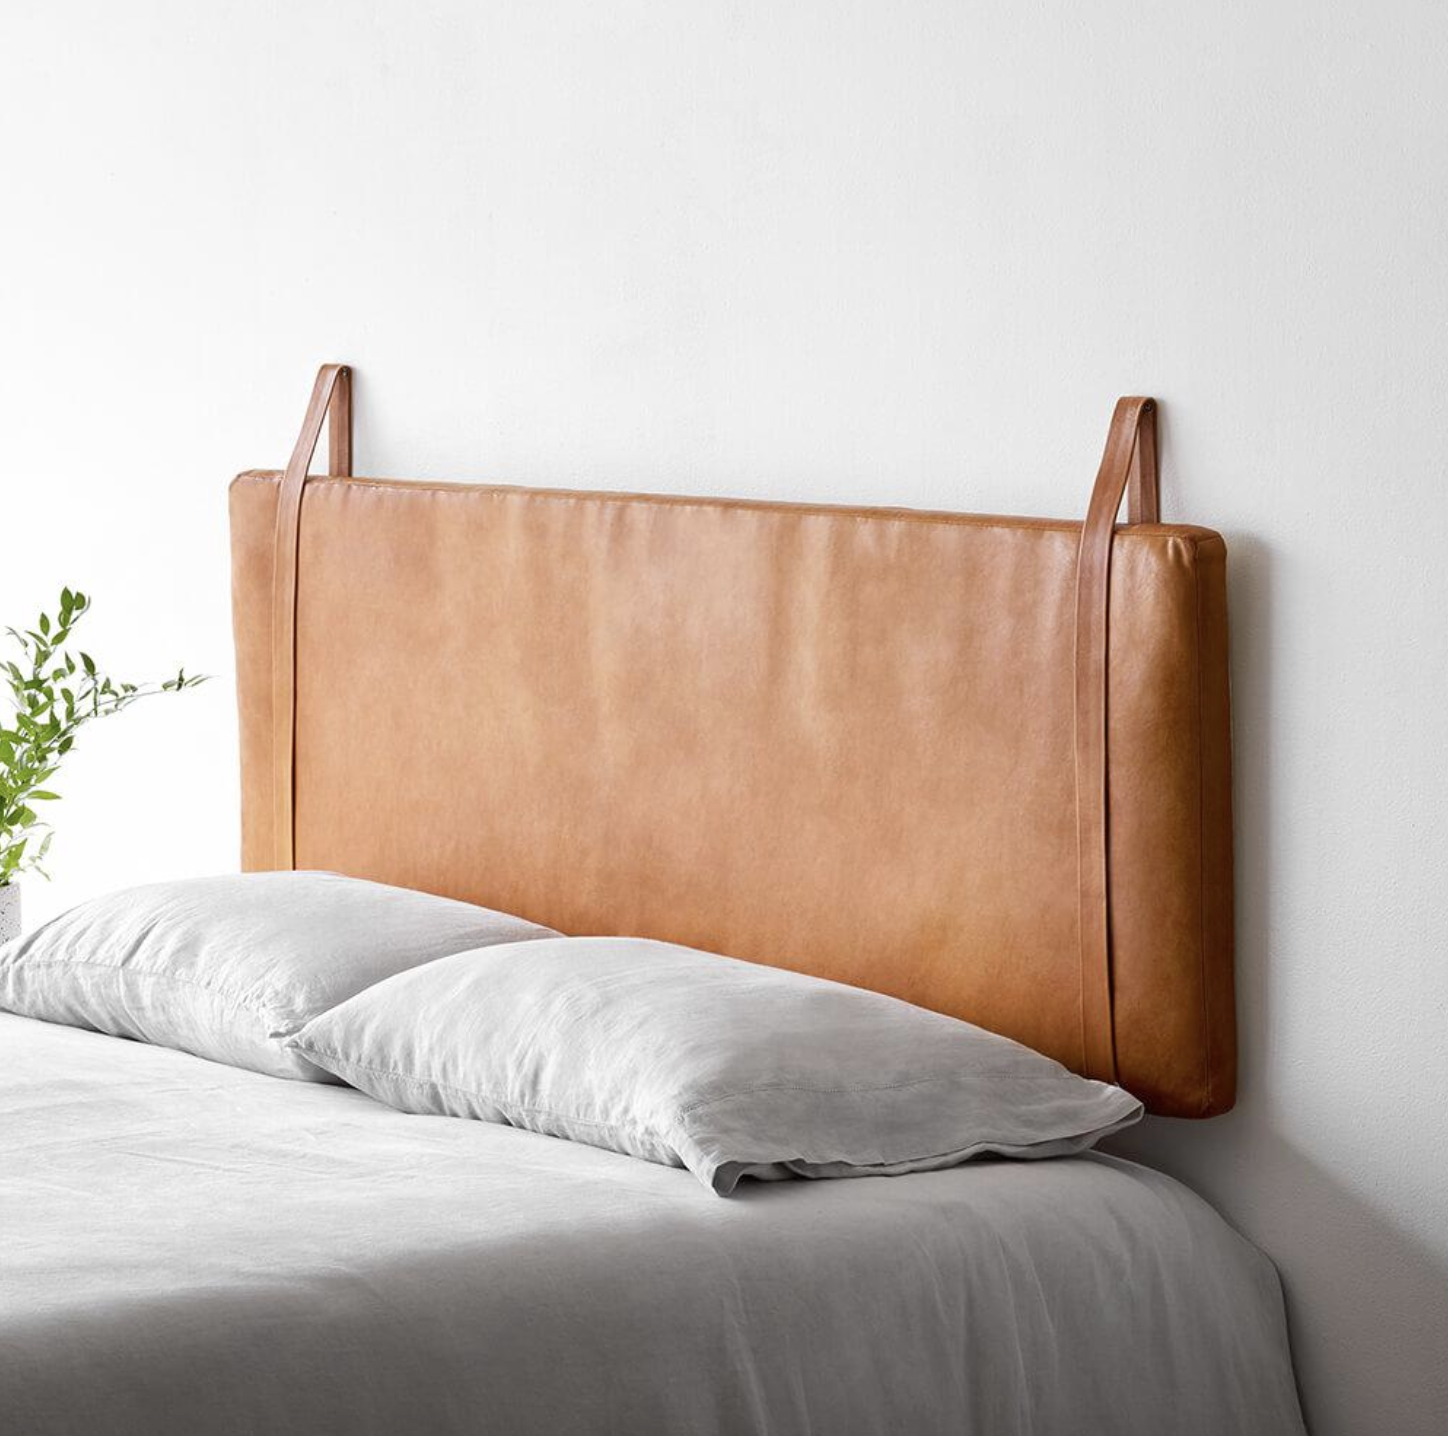 9 Wall Mounted Floating Headboards We, How To Fix A Headboard The Wall